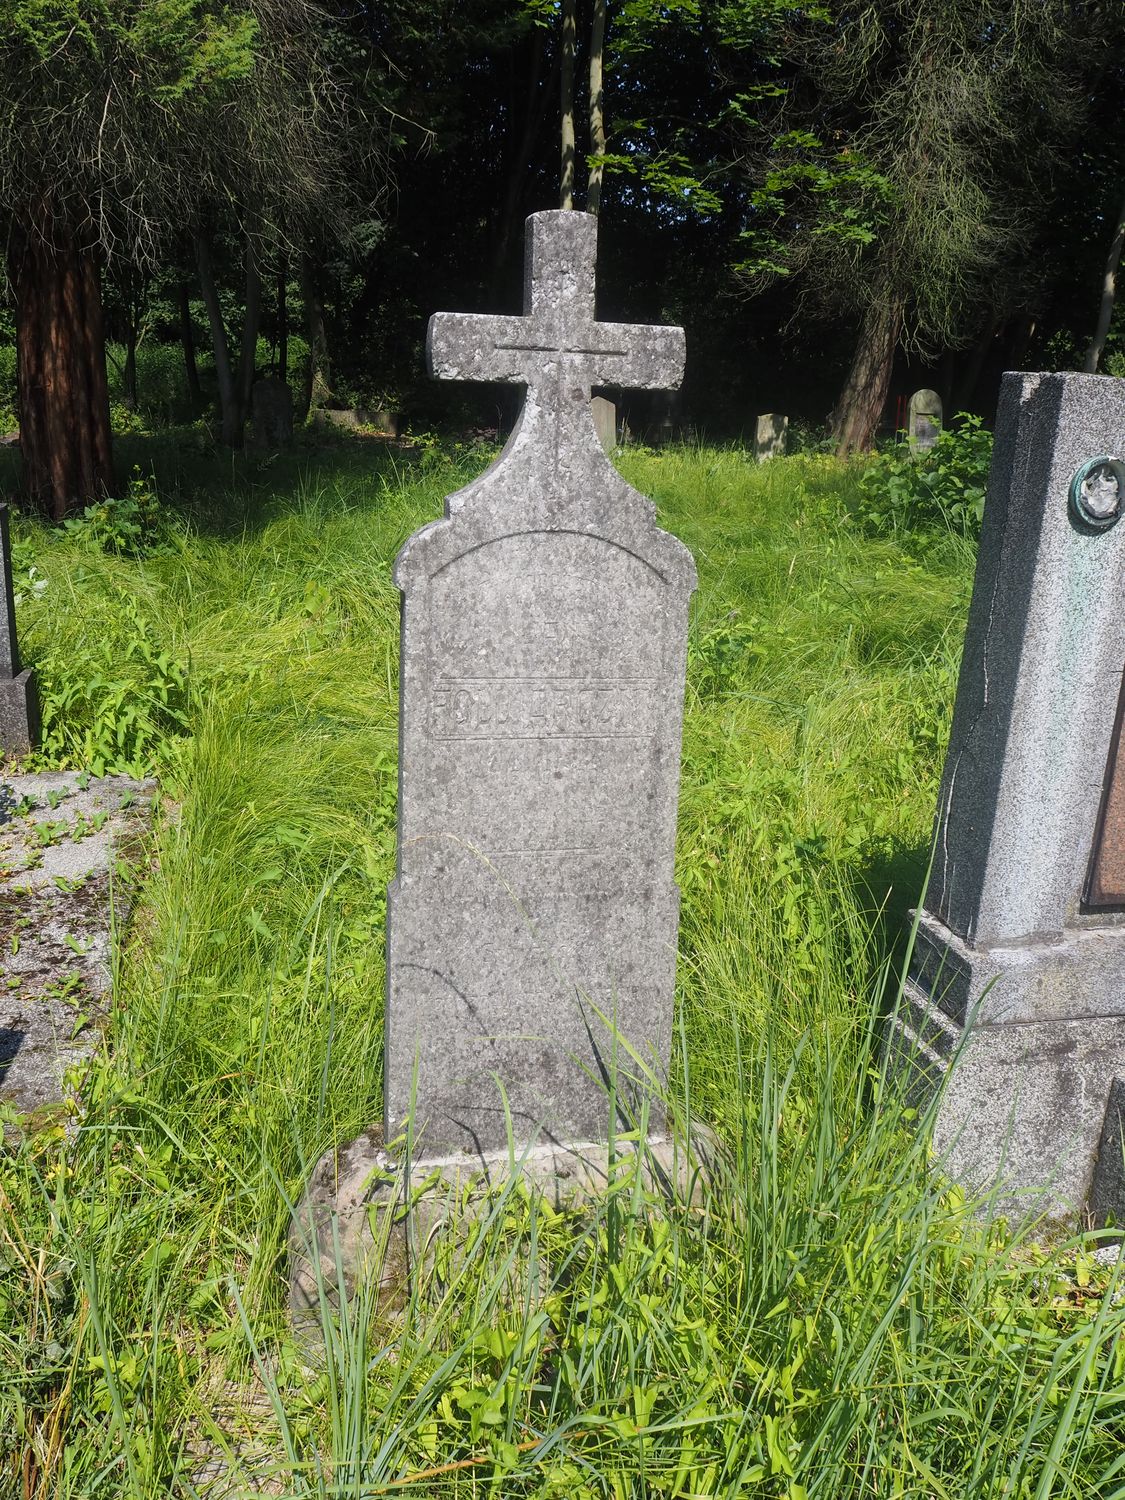 Tombstone of Jan Folwarczny, cemetery in Karviná Mexico, as of 2022.